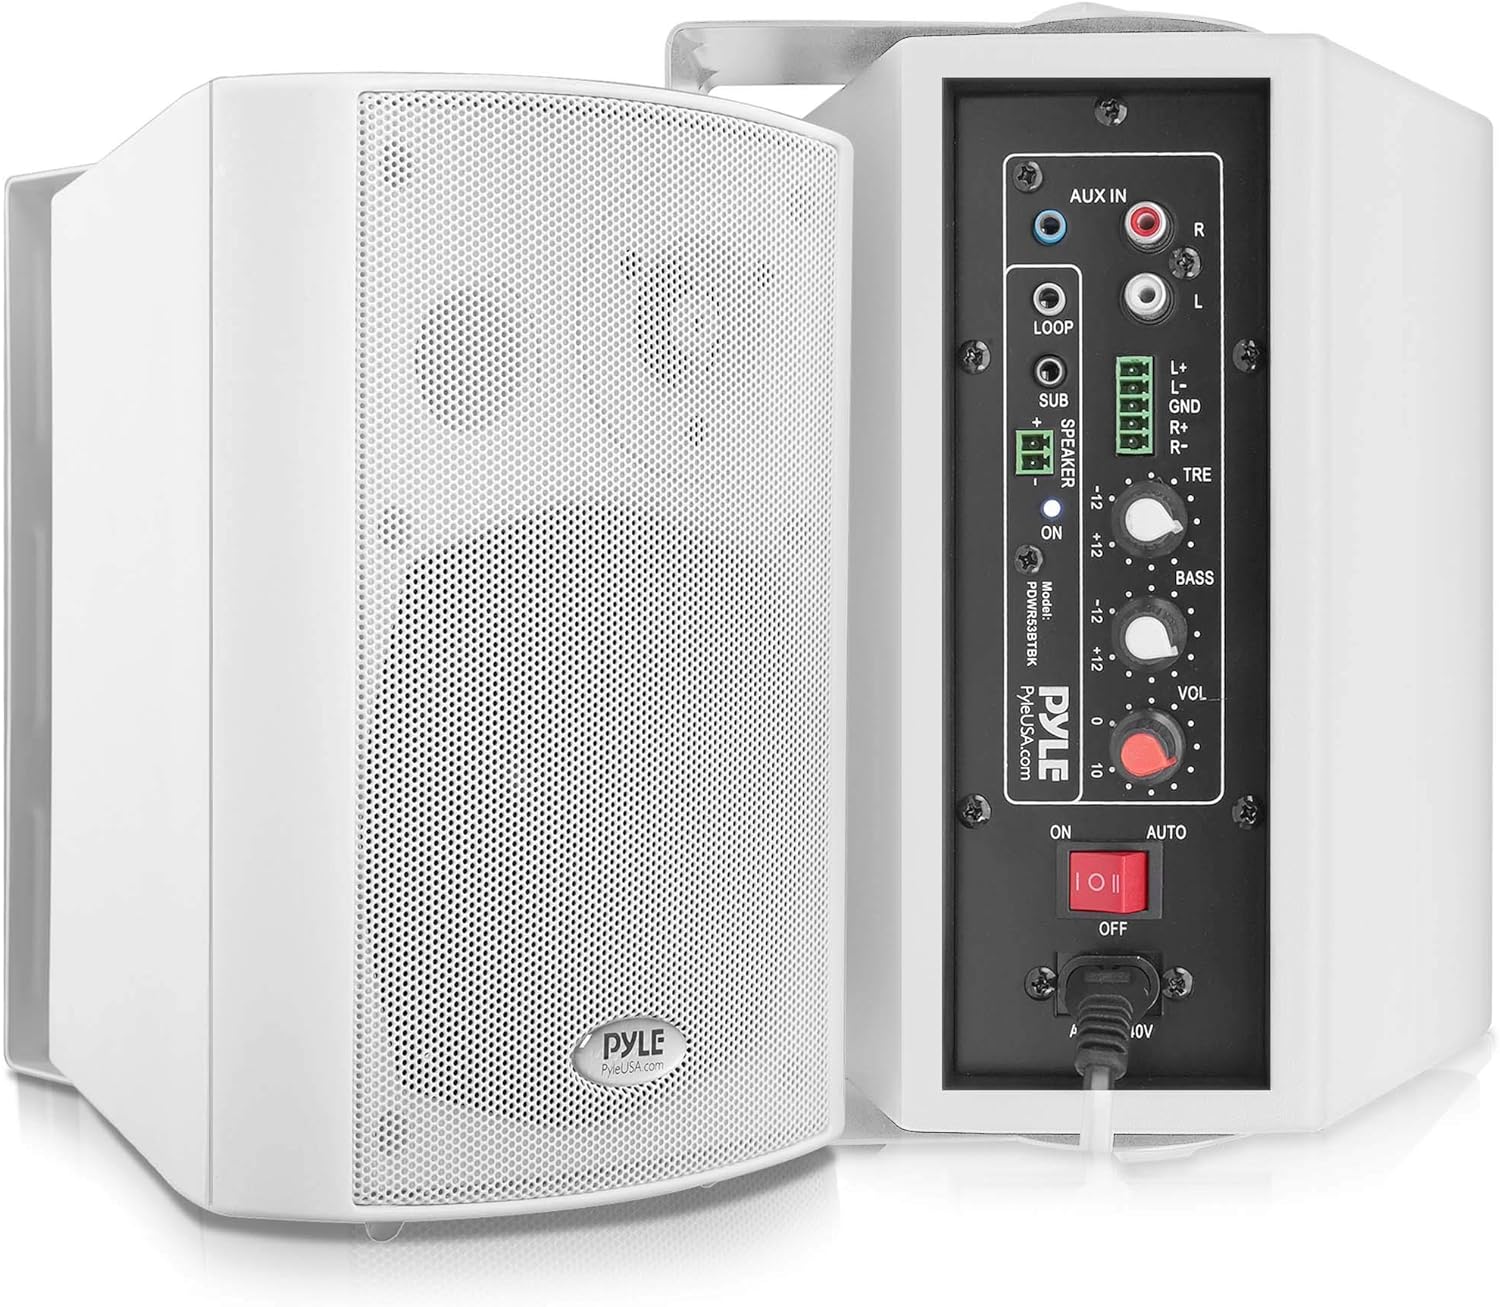 Pyle Wall Mount Home Speaker System